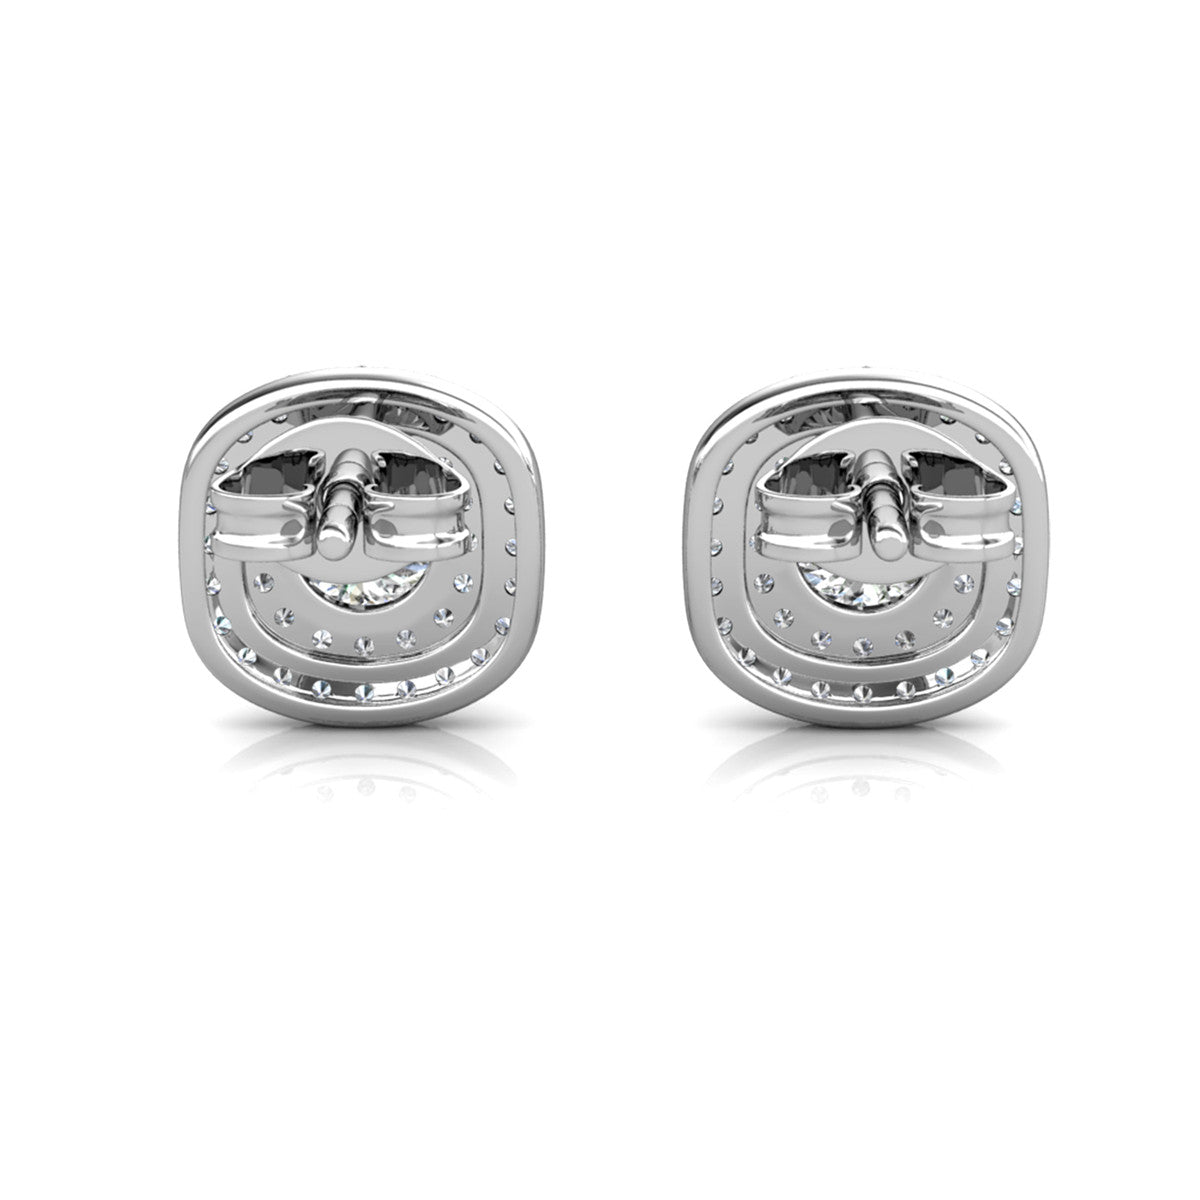 Moissanite by Cate & Chloe Lucy Sterling Silver Stud Earrings with Moissanite Crystals